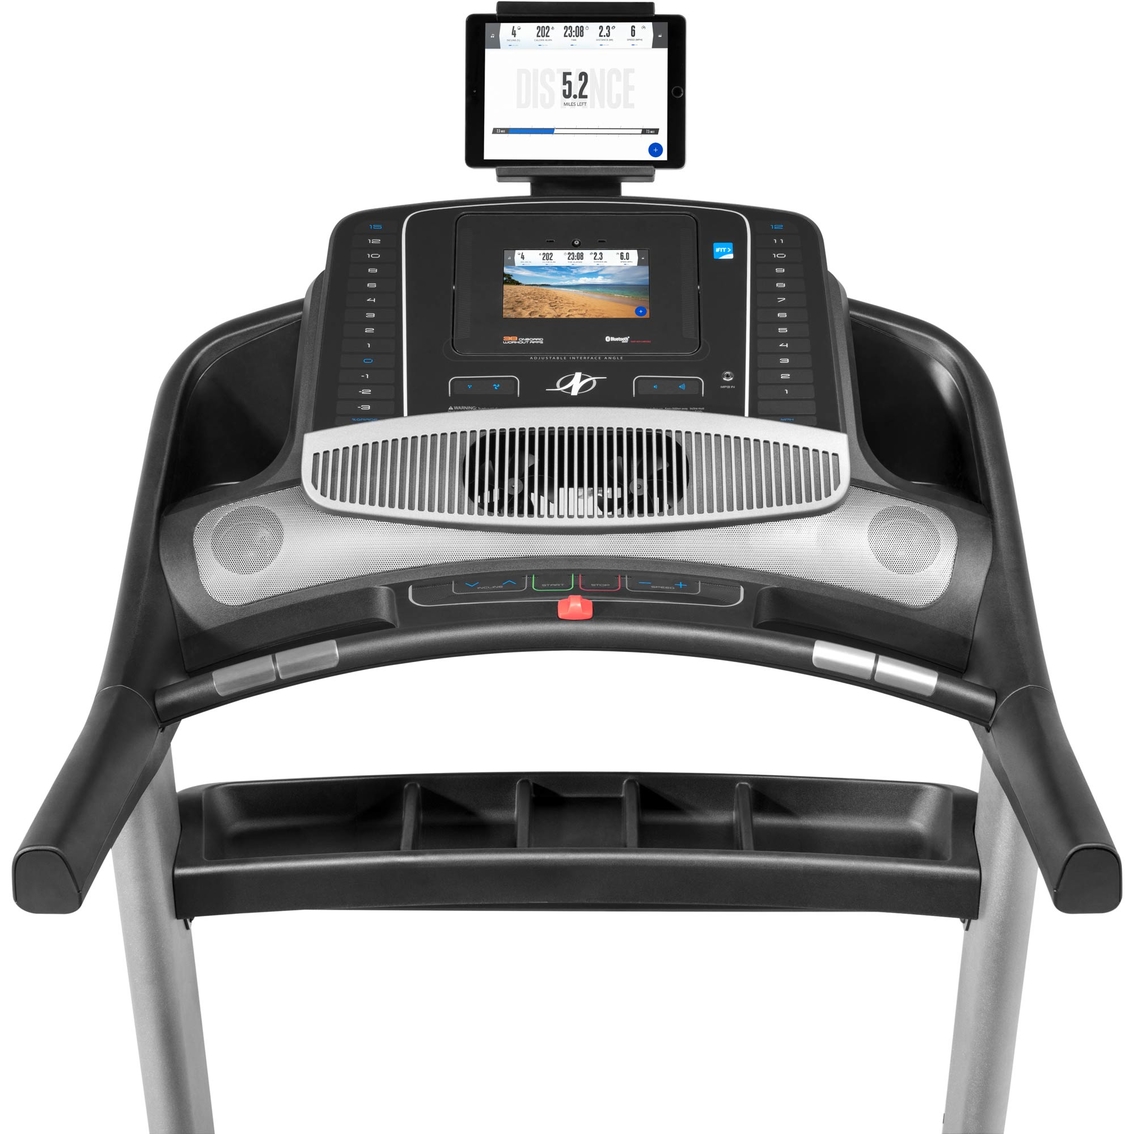 NordicTrack Commercial 1750 Treadmill - Image 2 of 3